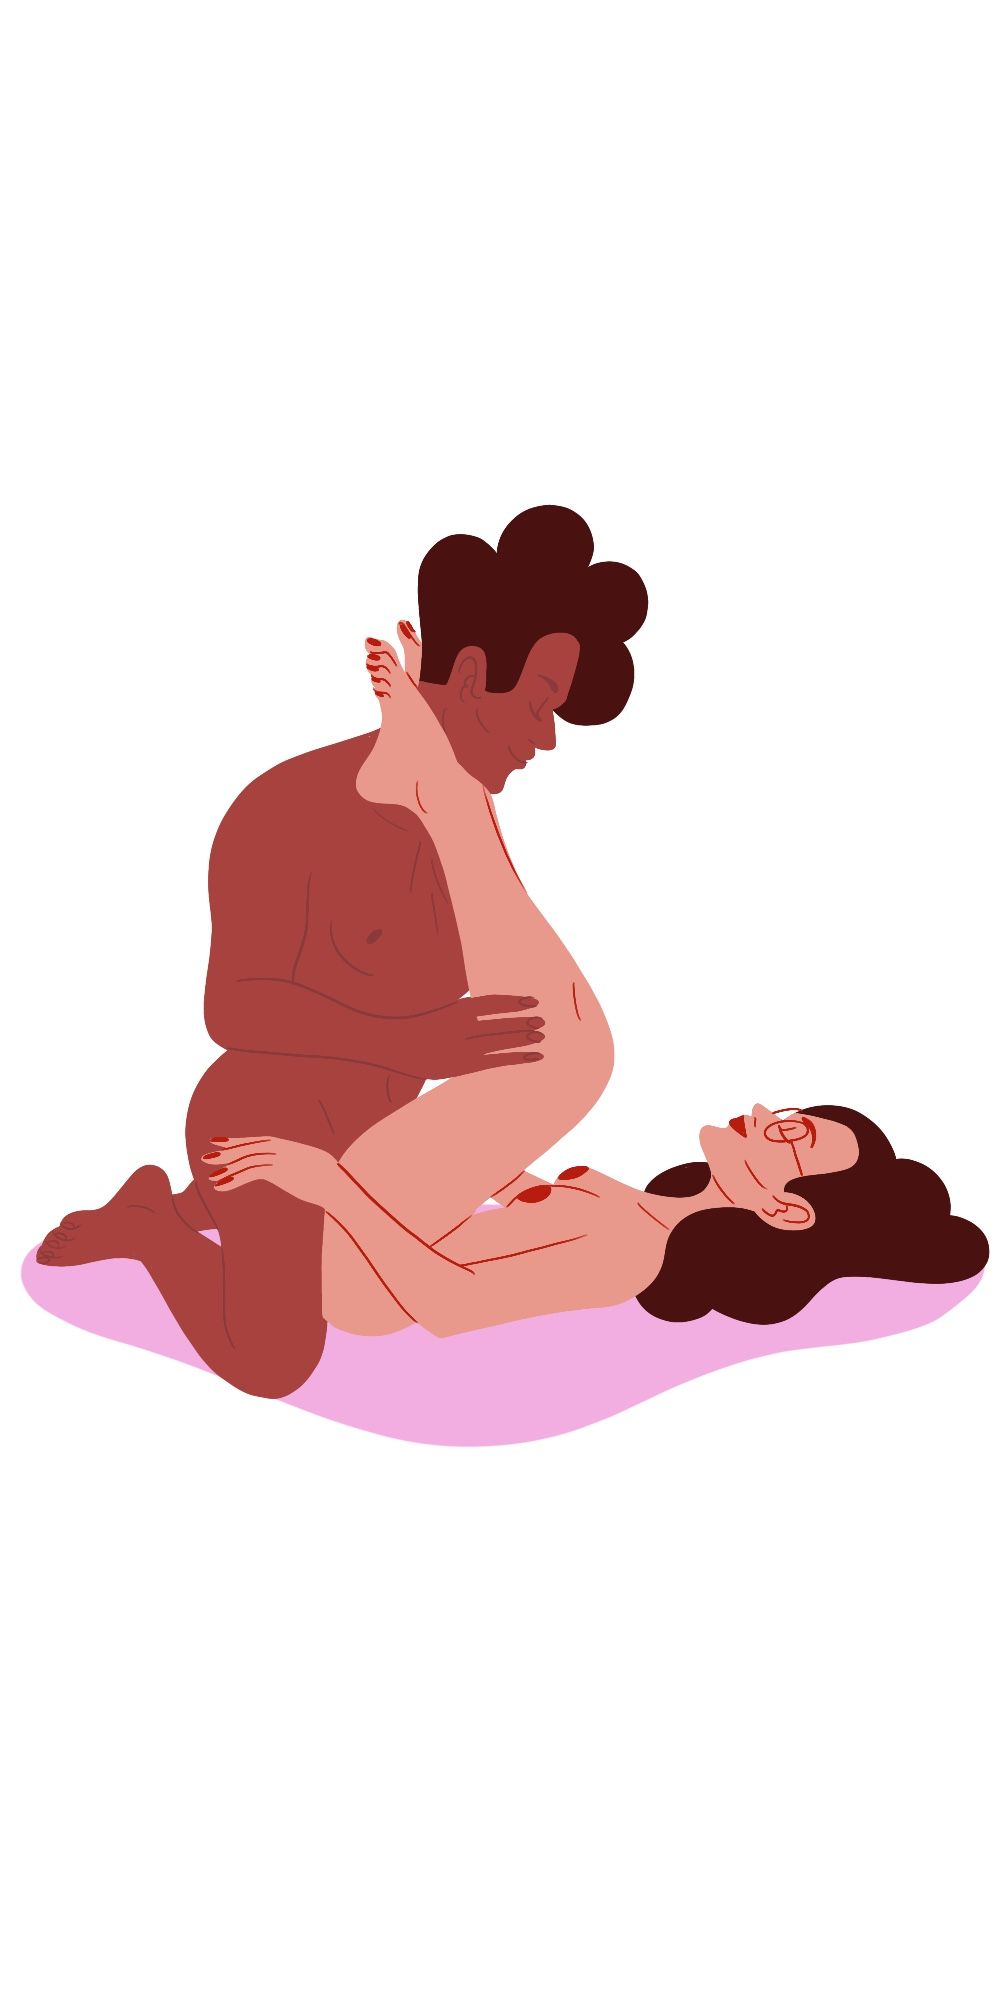 wives favorite position to experience orgasm